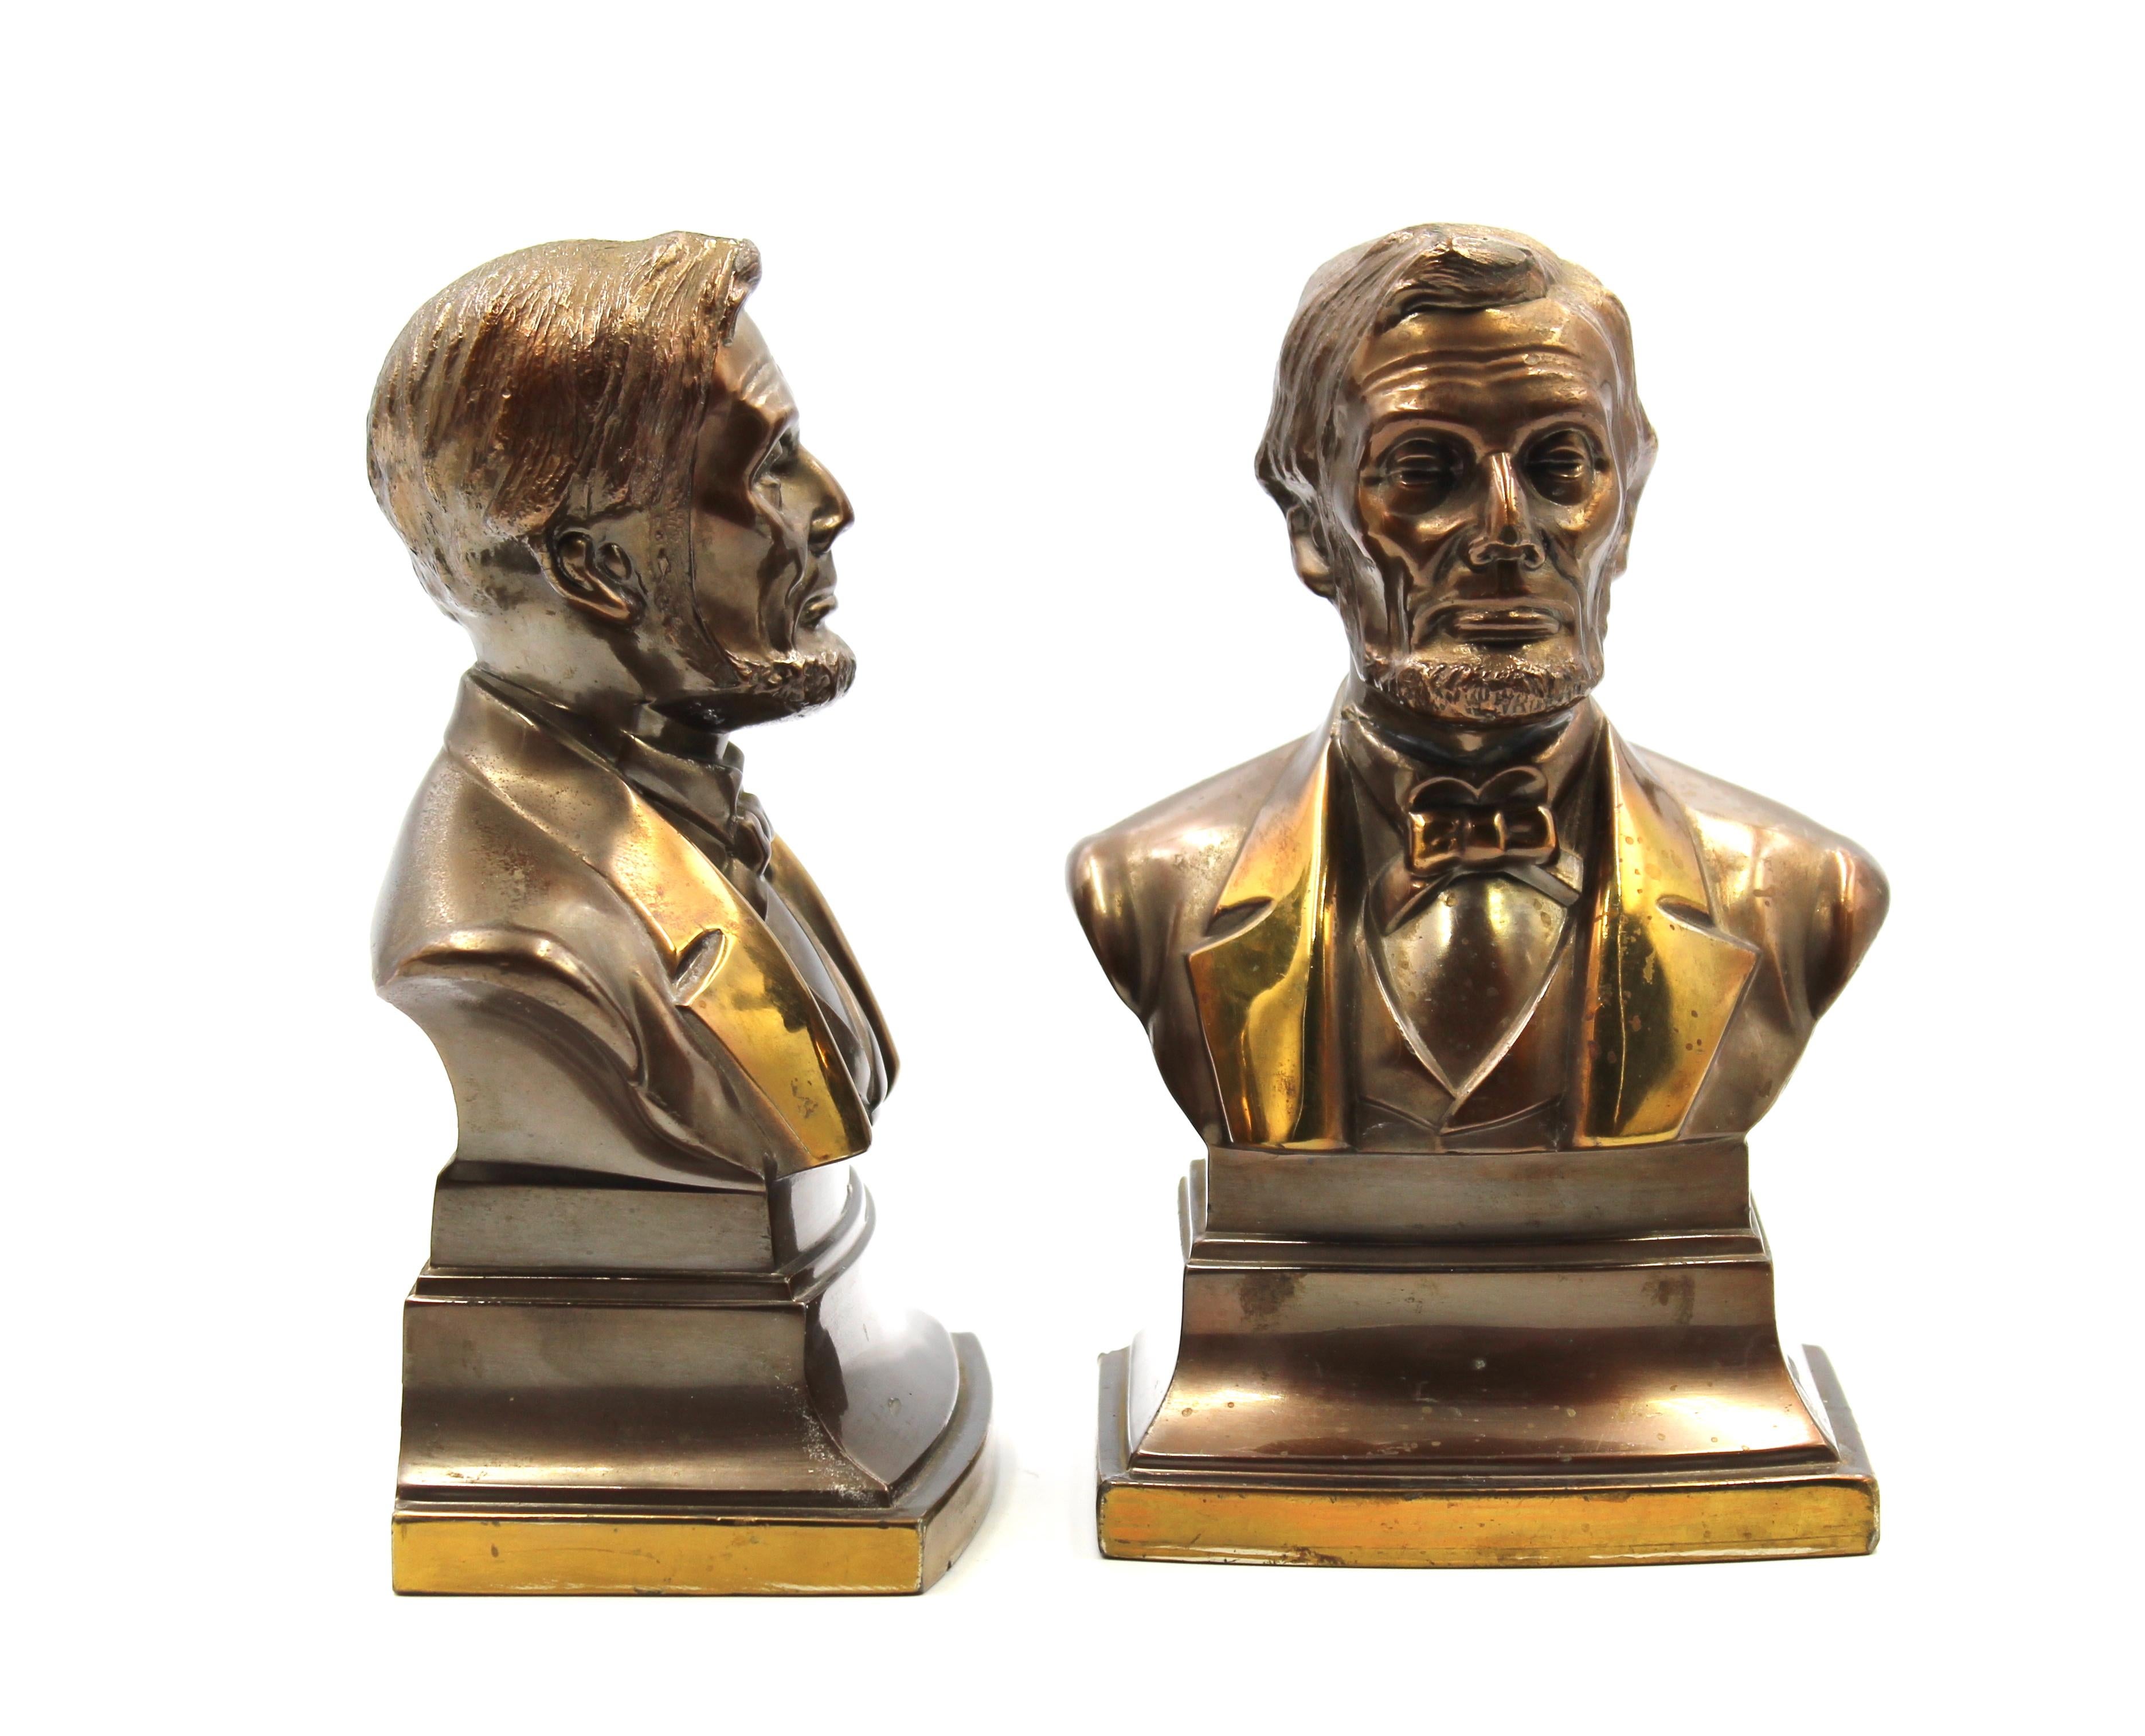 This is a pair of vintage Abraham Lincoln bust bookends. These bookends are made of brass and were produced by PM Craftsman in the United States. The bookends depict President Abraham Lincoln, from head to shoulders, atop small square pedestals.